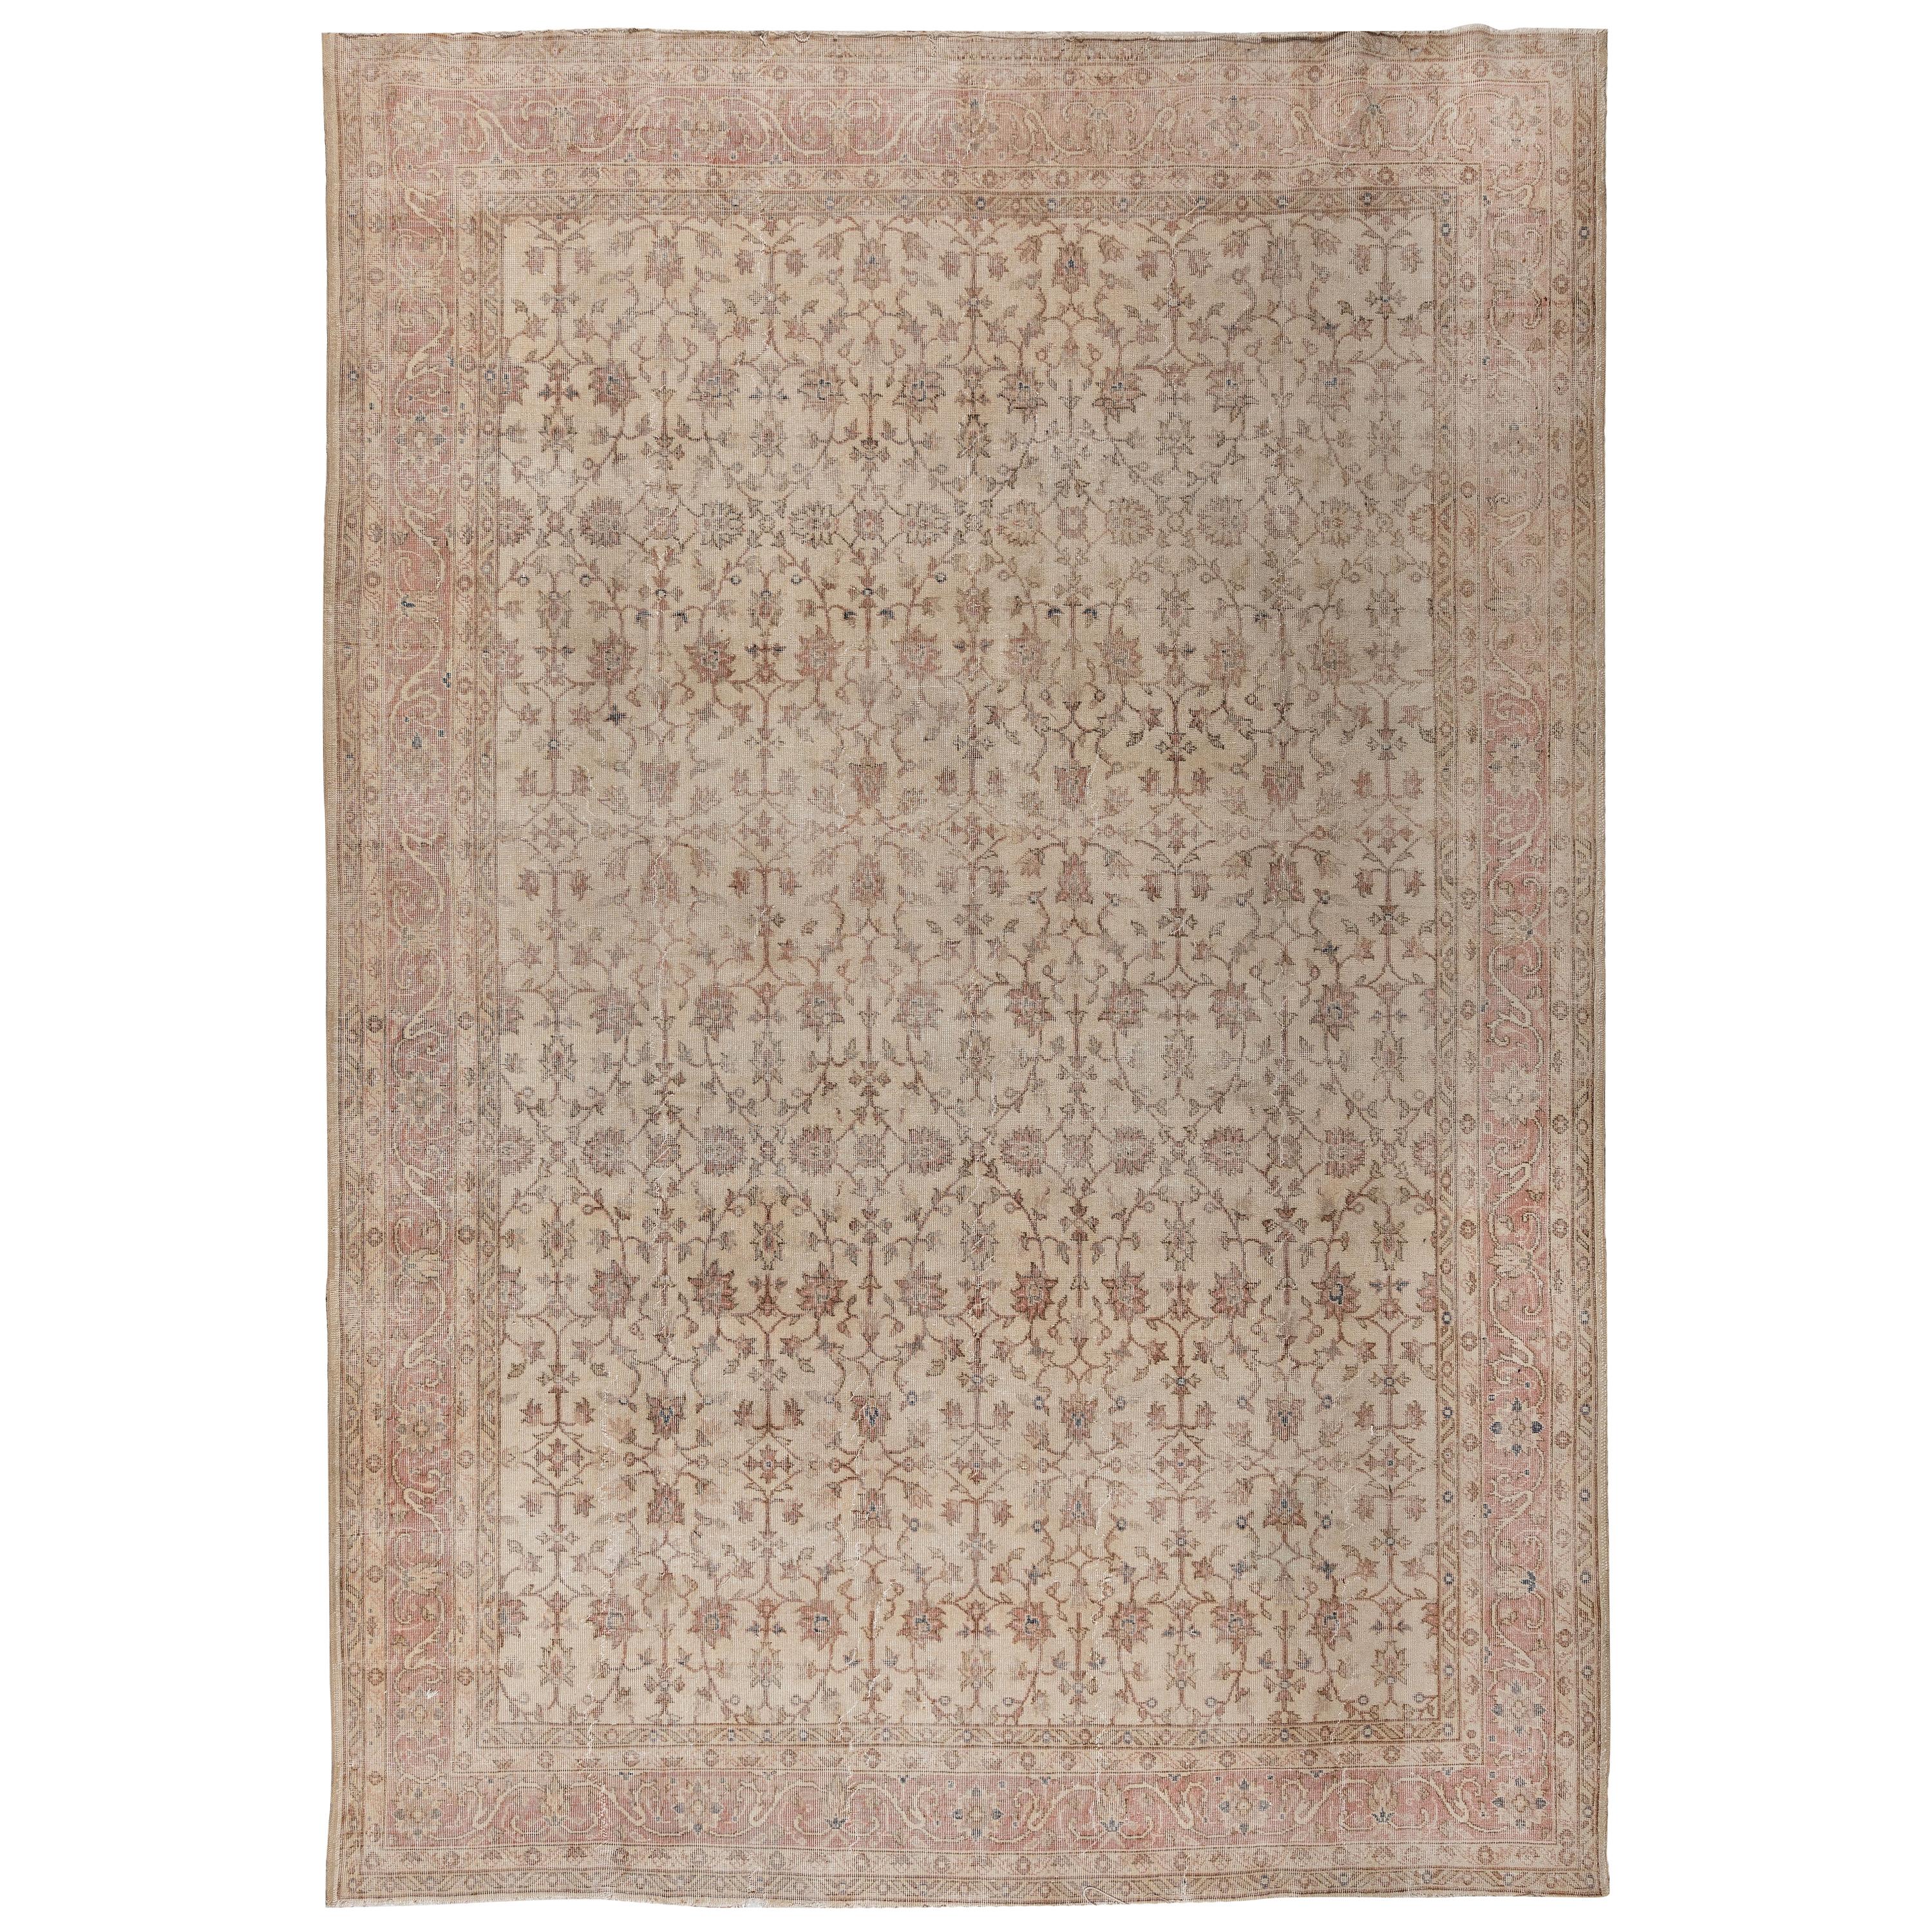 9.5x12.7 Ft Vintage Hand Knotted Oushak Rug in Soft, Muted Colors